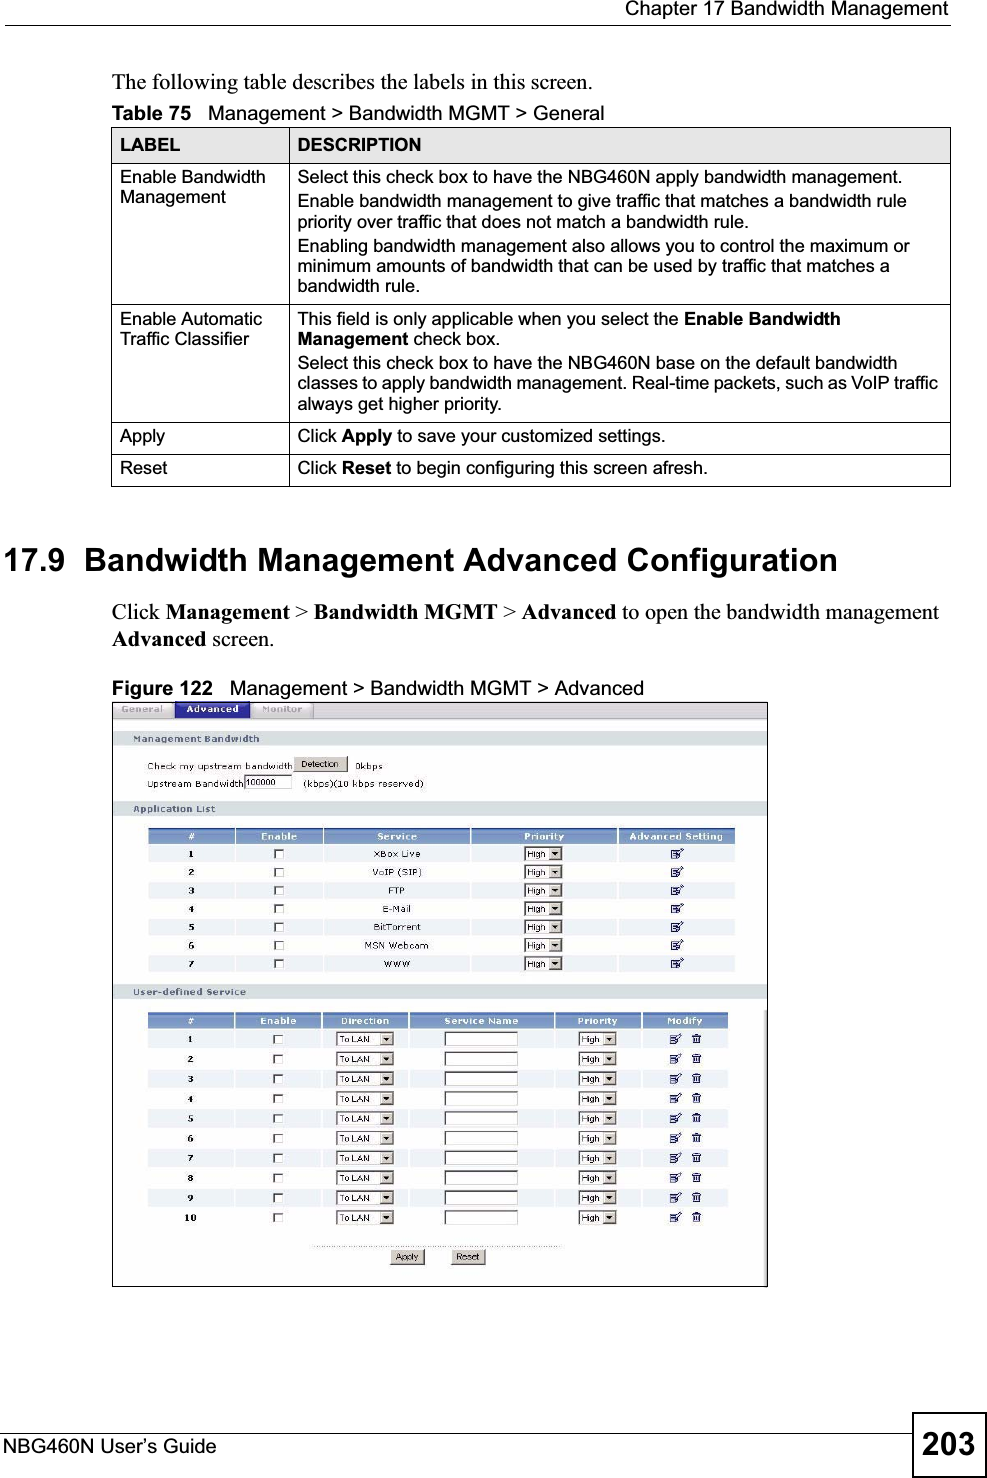  Chapter 17 Bandwidth ManagementNBG460N User’s Guide 203The following table describes the labels in this screen.17.9  Bandwidth Management Advanced Configuration Click Management &gt; Bandwidth MGMT &gt; Advanced to open the bandwidth management Advanced screen.Figure 122   Management &gt; Bandwidth MGMT &gt; Advanced Table 75   Management &gt; Bandwidth MGMT &gt; GeneralLABEL DESCRIPTIONEnable Bandwidth Management Select this check box to have the NBG460N apply bandwidth management. Enable bandwidth management to give traffic that matches a bandwidth rule priority over traffic that does not match a bandwidth rule. Enabling bandwidth management also allows you to control the maximum or minimum amounts of bandwidth that can be used by traffic that matches a bandwidth rule. Enable Automatic Traffic Classifier This field is only applicable when you select the Enable Bandwidth Management check box.Select this check box to have the NBG460N base on the default bandwidth classes to apply bandwidth management. Real-time packets, such as VoIP traffic always get higher priority.Apply Click Apply to save your customized settings.Reset Click Reset to begin configuring this screen afresh.